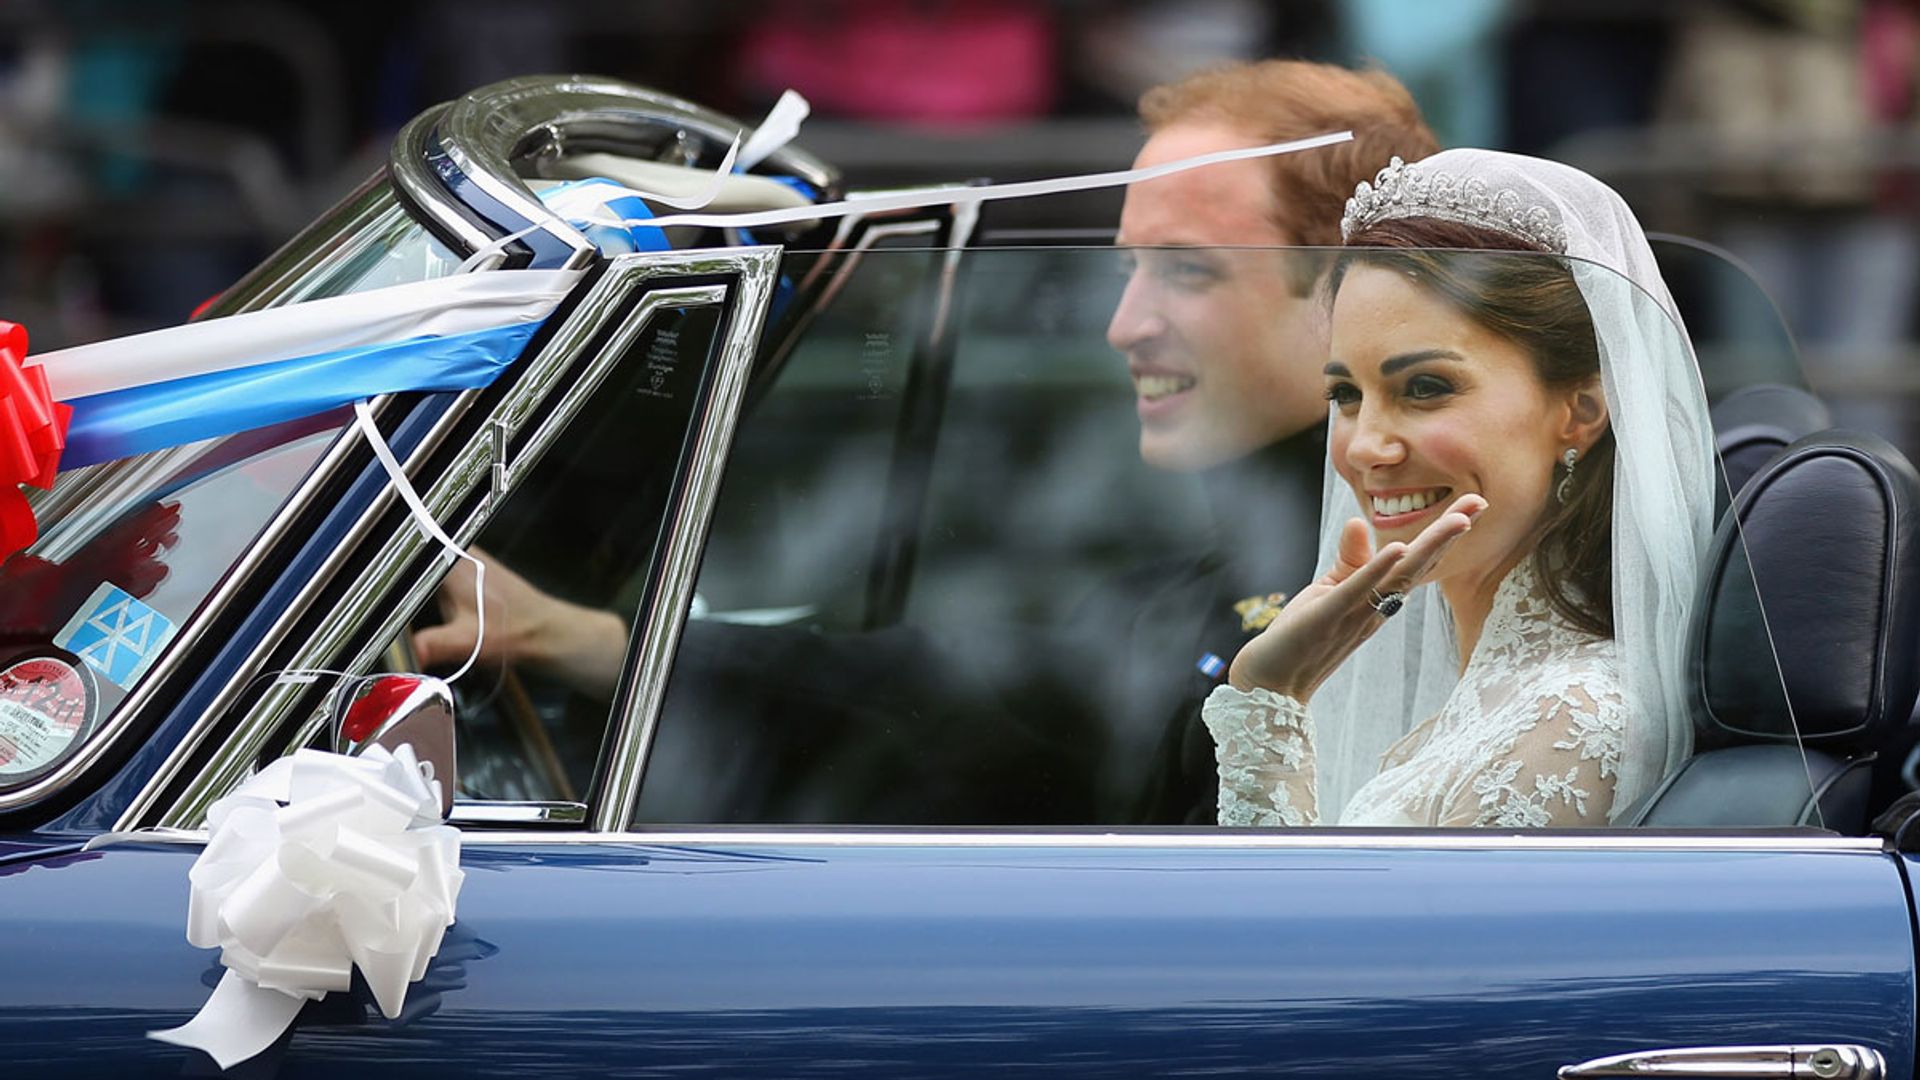 Prince William & Kate Middleton's royal wedding car was powered by wine and cheese